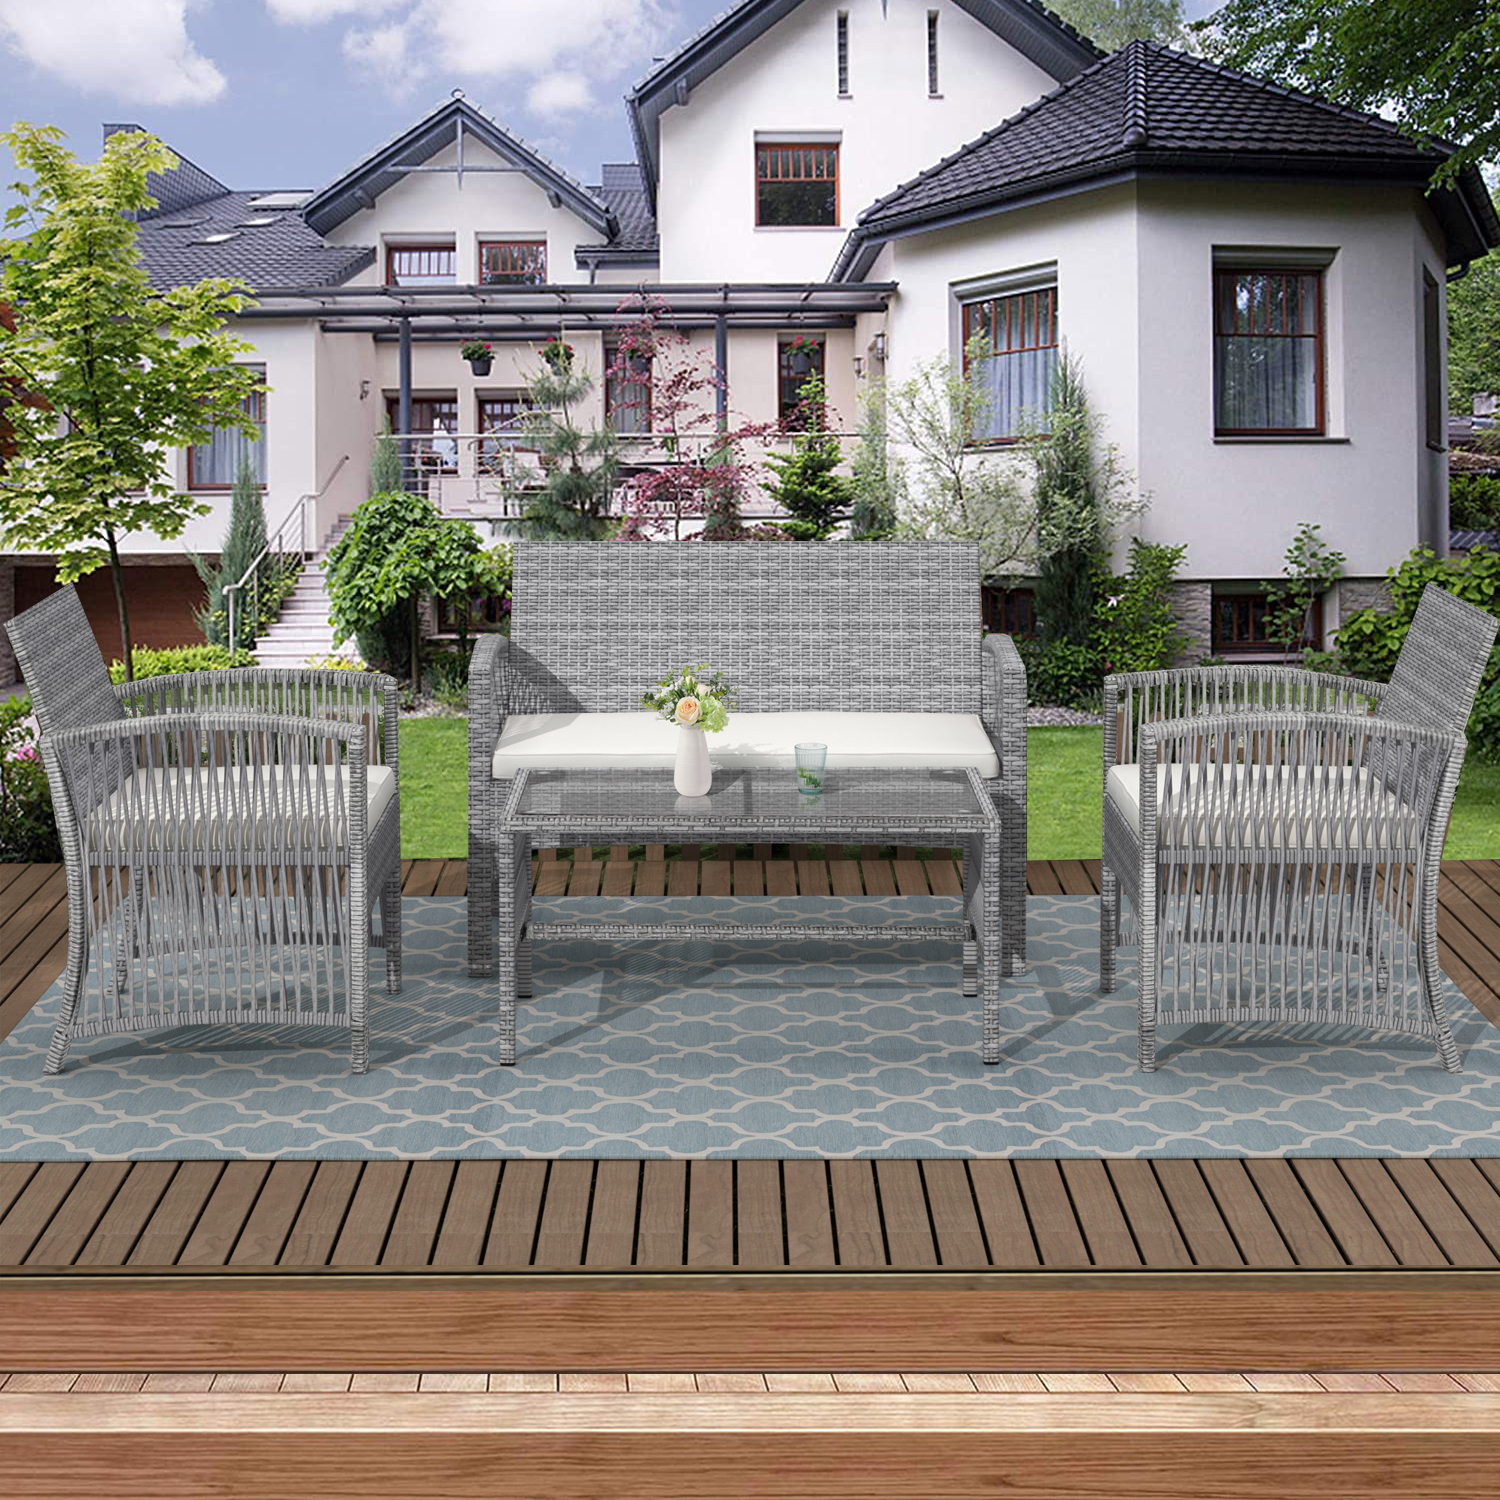 Outdoor Patio Furniture Sets, 4 Piece Gray Wicker Outdoor Porch Conversation Sets, 2pcs Arm Chairs, 1pc Loveseat&Coffee Table, Patio Bar Set, Dining Set for Backyard Lawn Porch Poolside Garden, W7776 - image 2 of 11